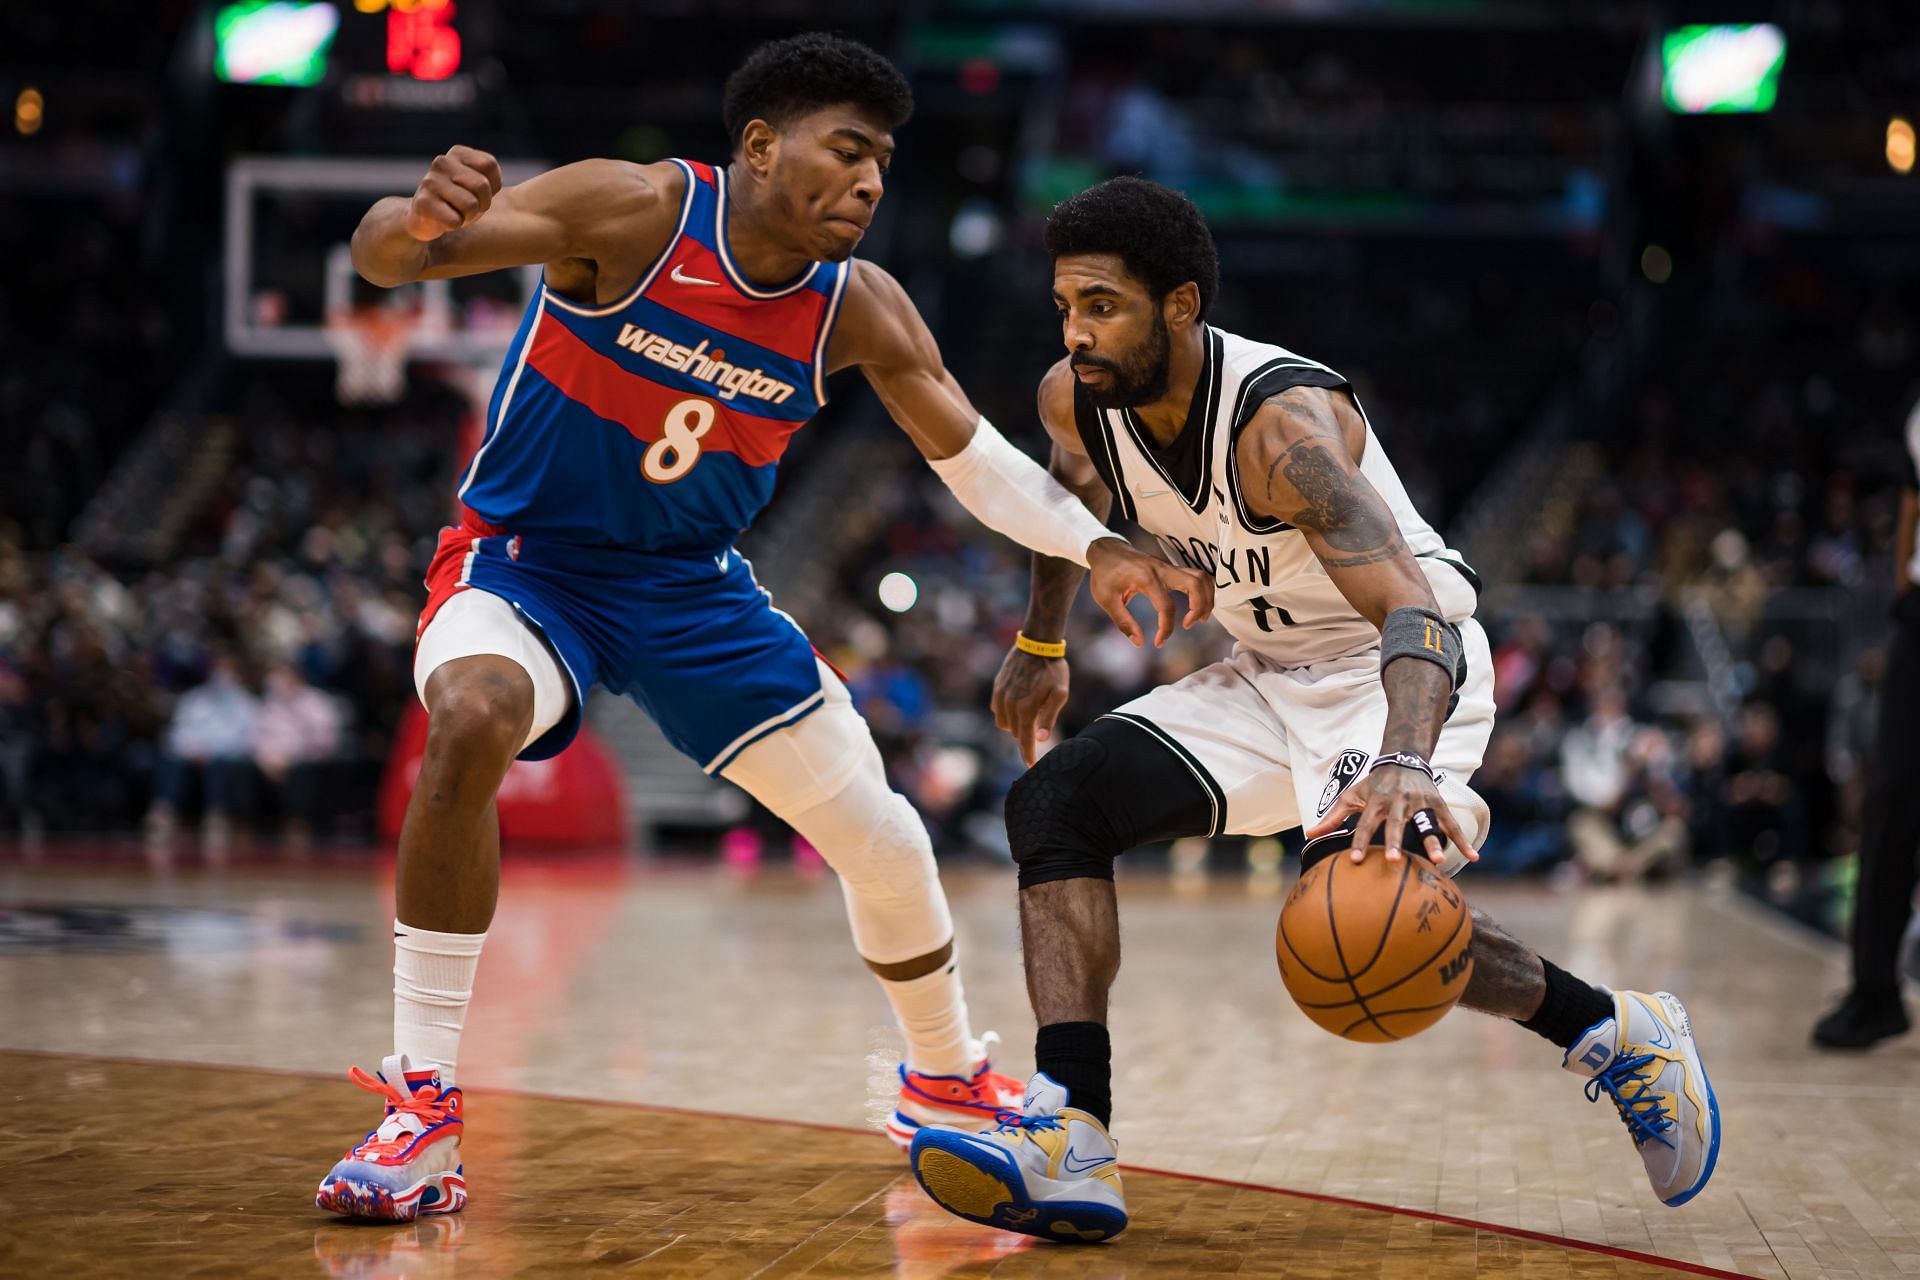 Kyrie Irving of the Brooklyn Nets handles the ball as Rui Hachimura of the Washington Wizards defends.